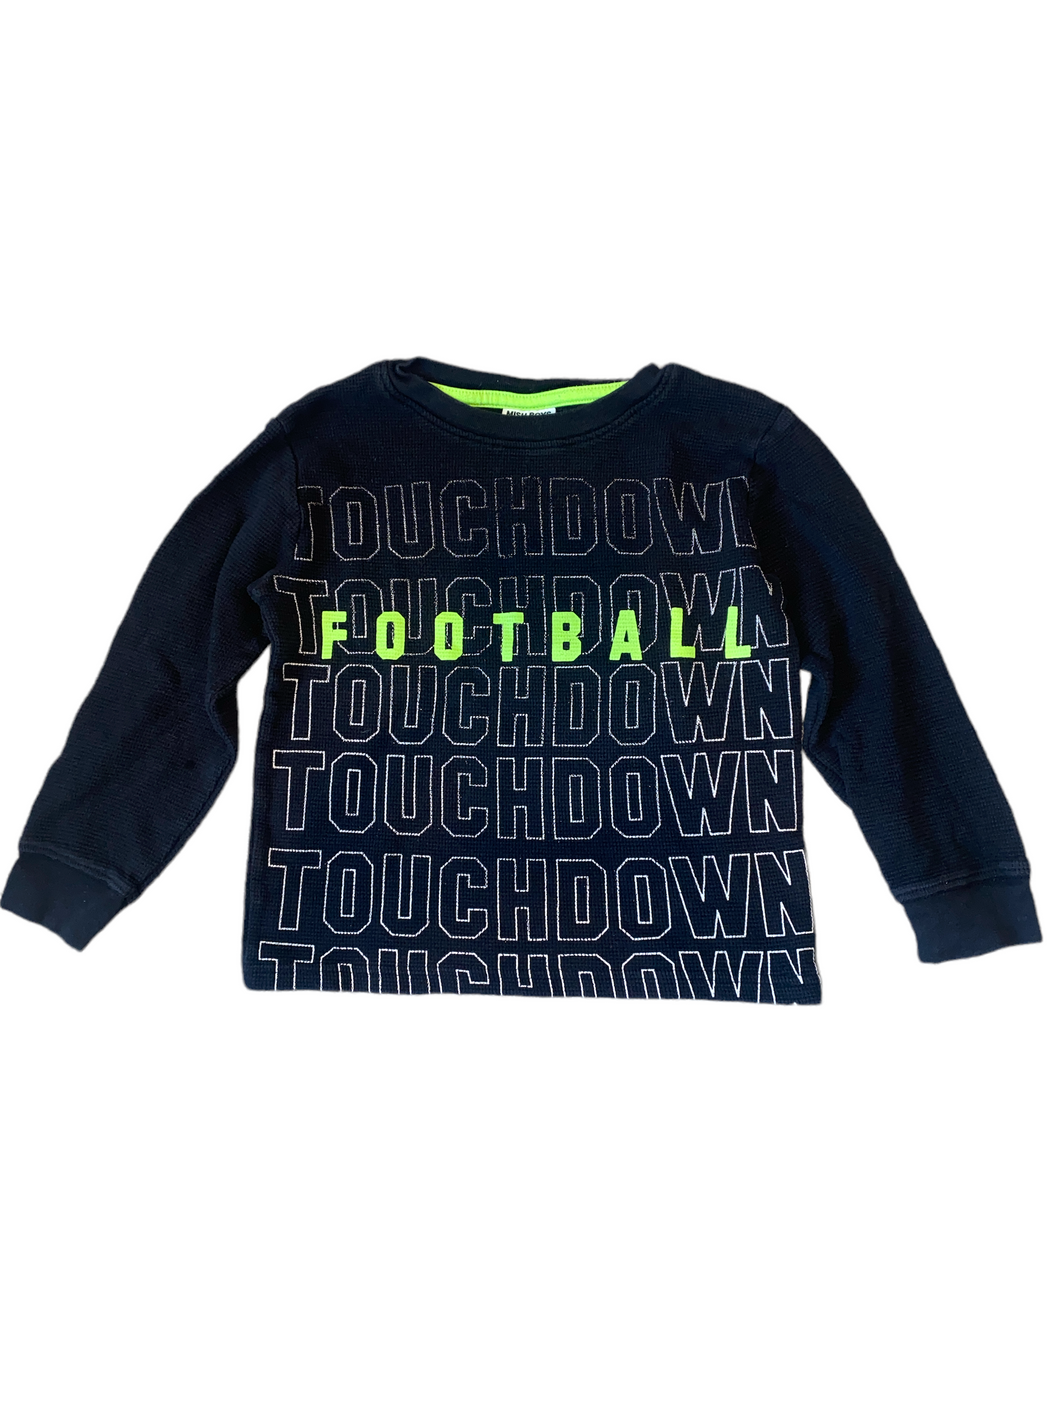 Mish boys Touchdown football thermal top 5